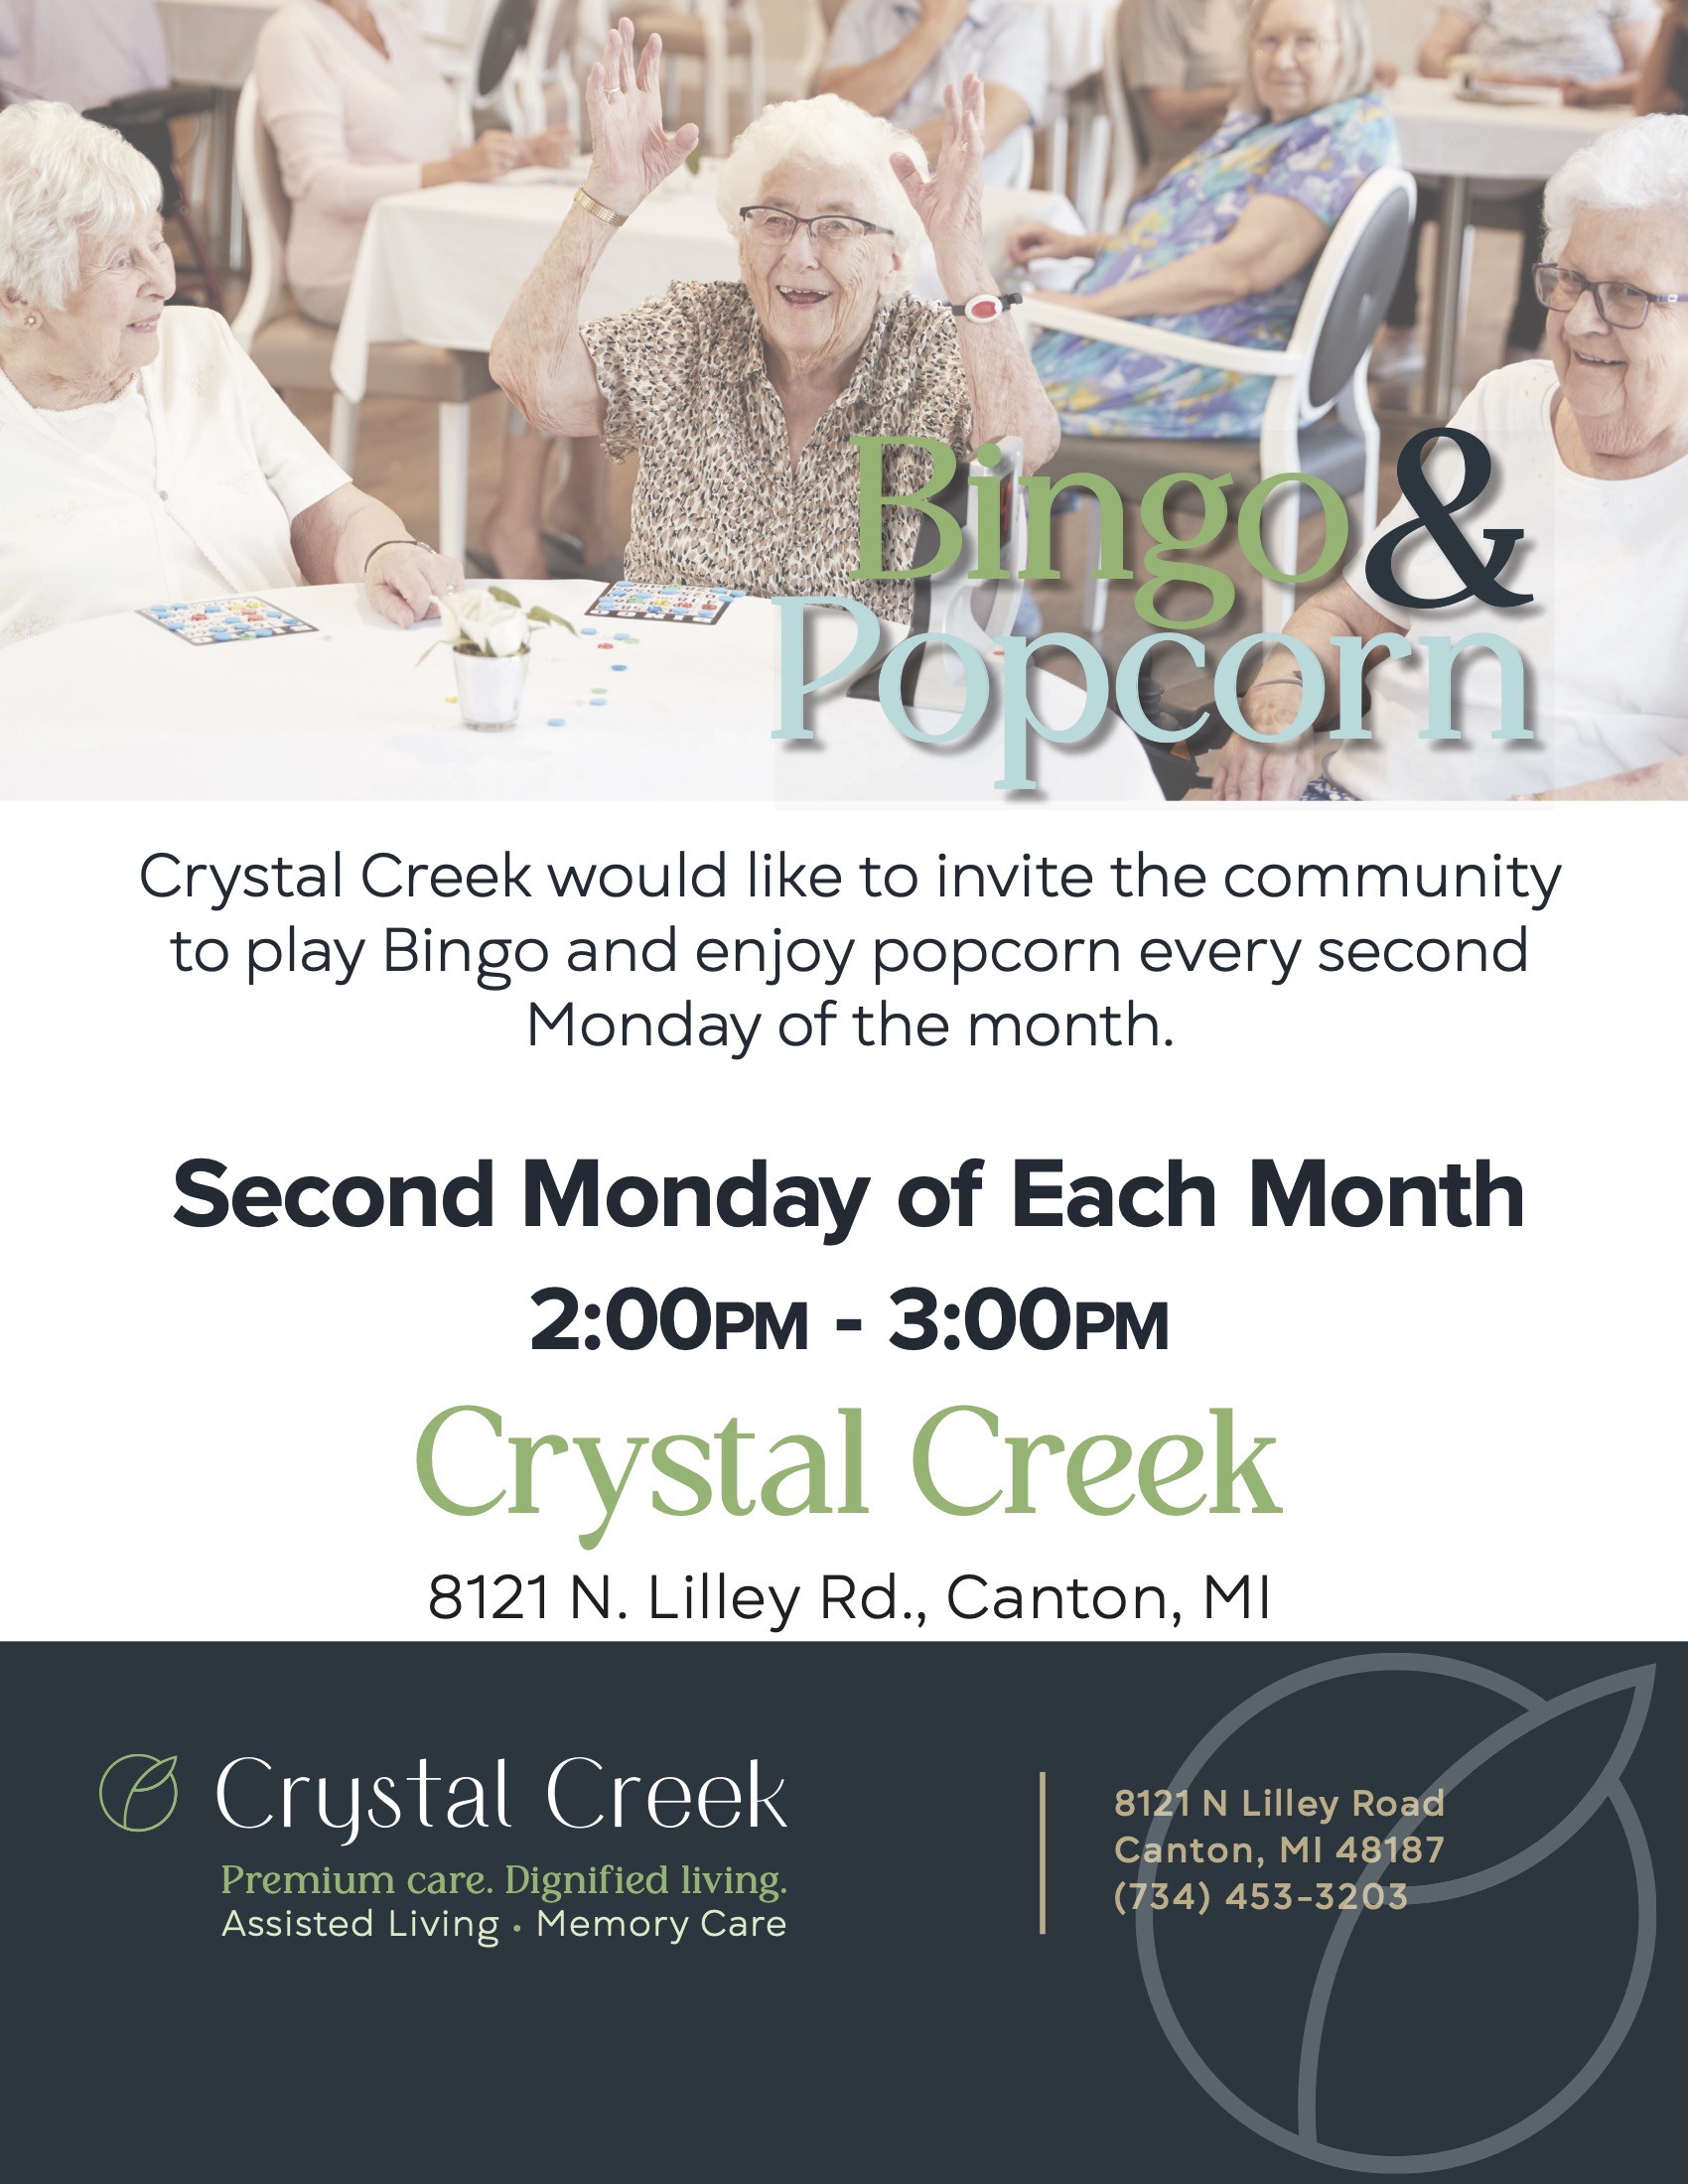 Join us for Bingo and Popcorn every second Monday of each month!